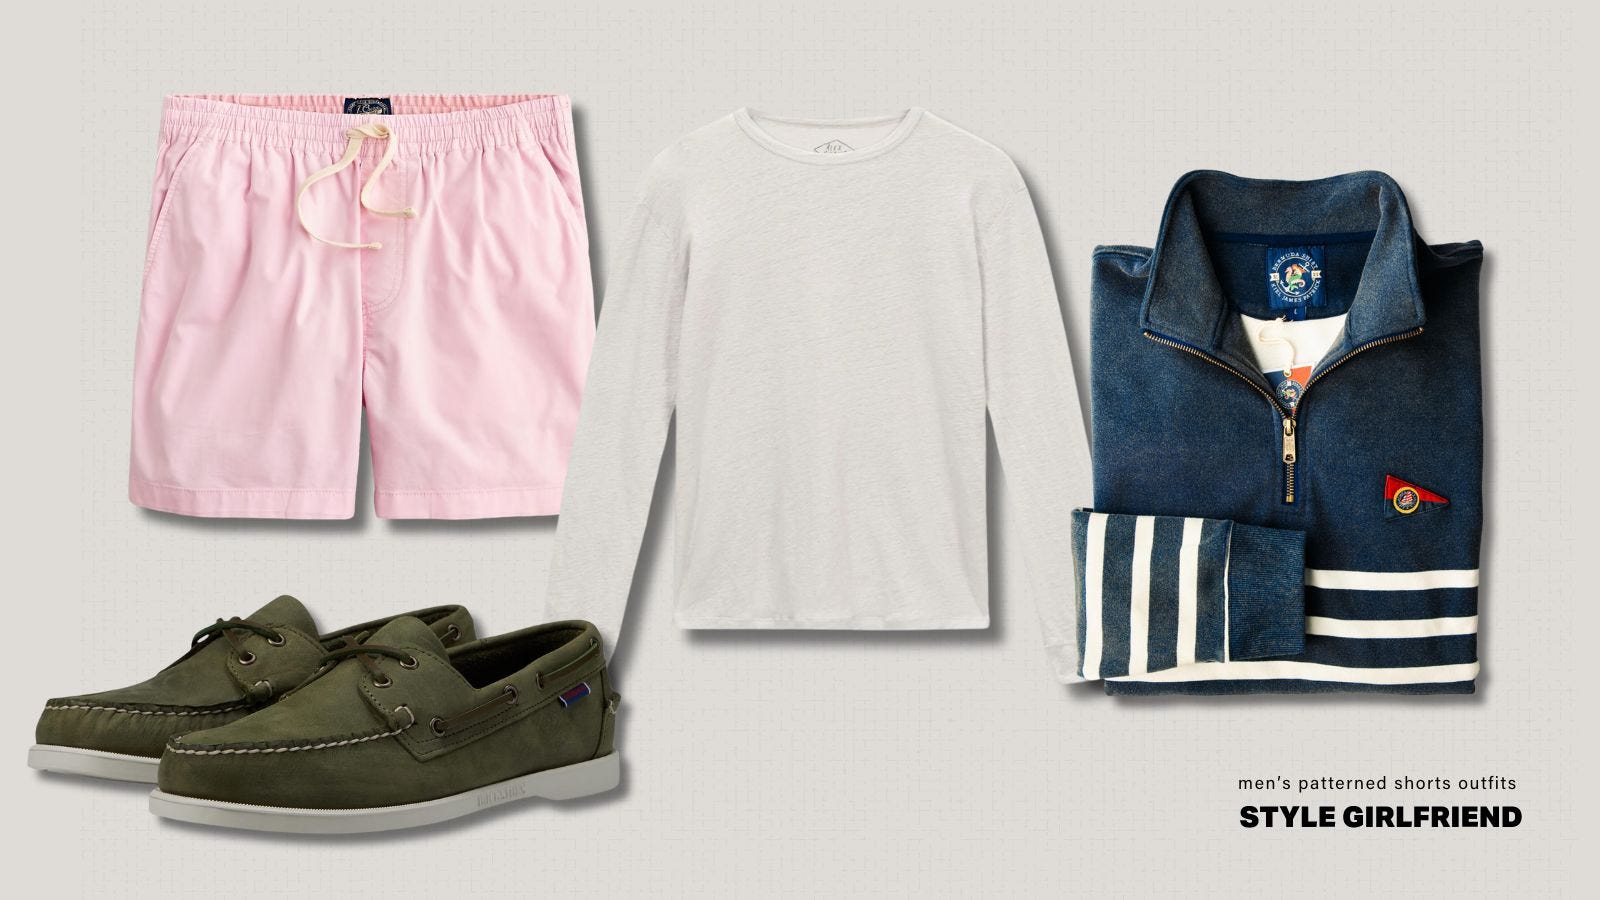 casual men's shorts outfit featuring pink drawstring shorts, a long-sleeve tee under a striped quarter zip pullover and green boat shoes